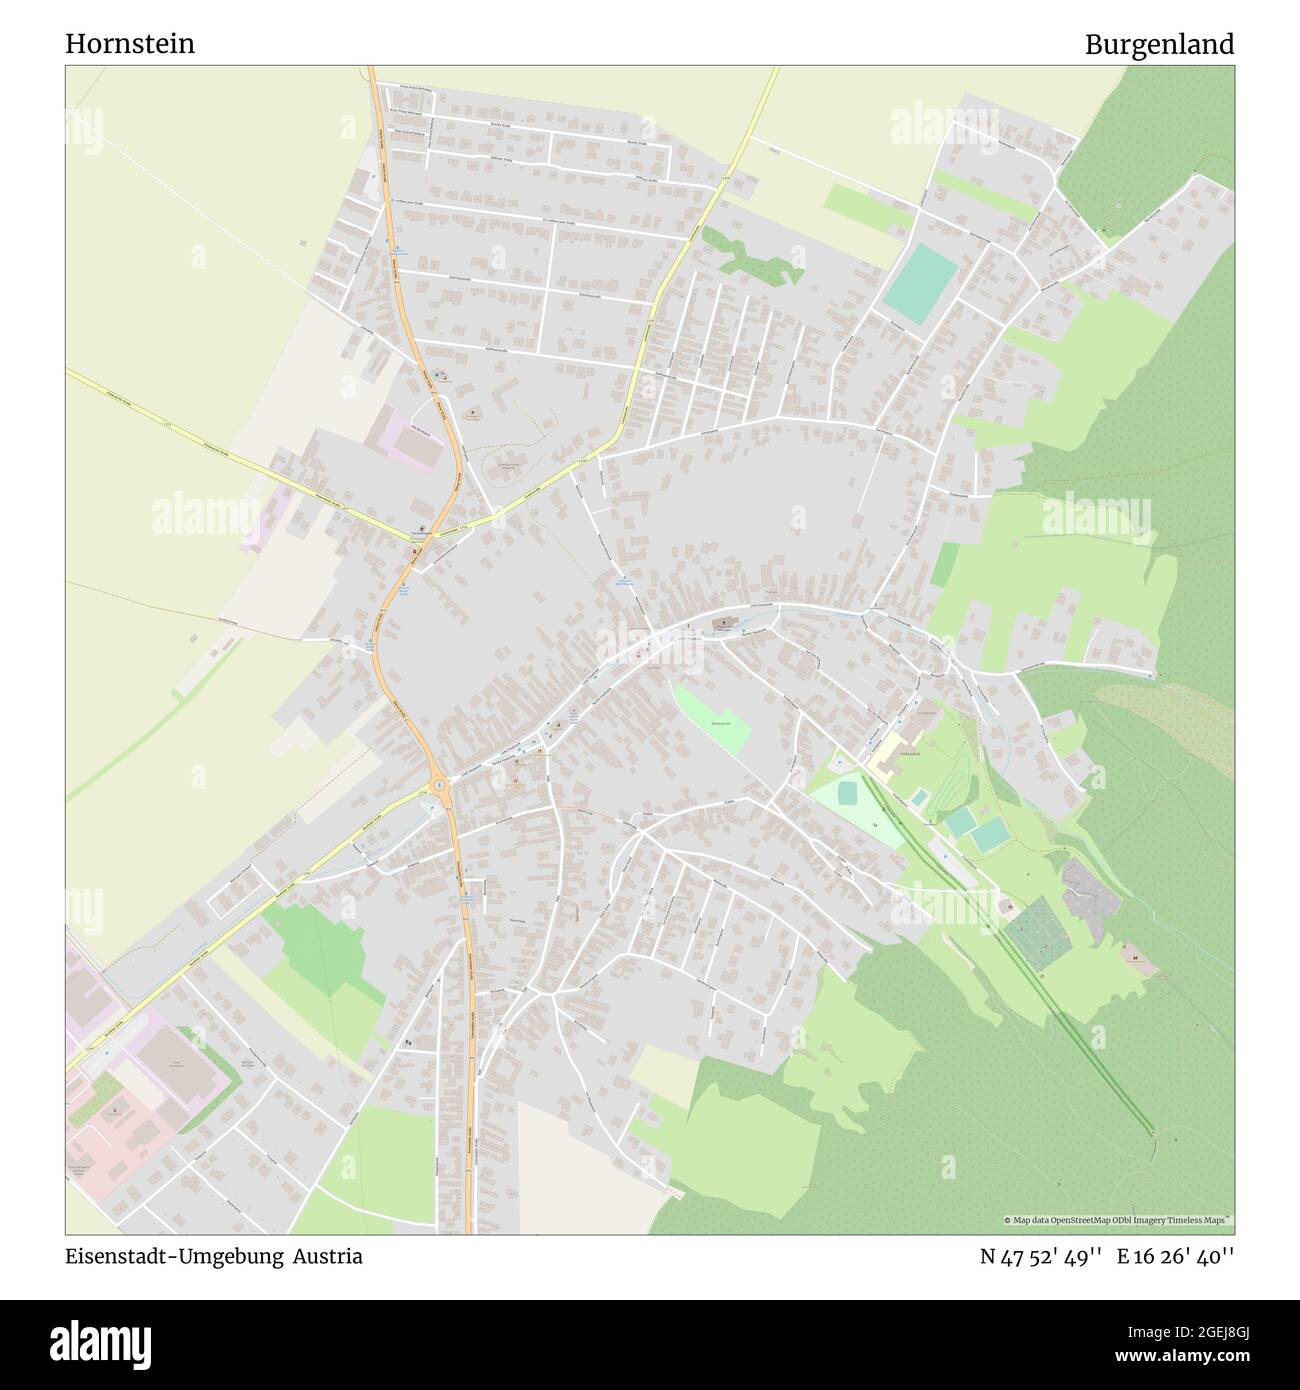 Hornstein, Eisenstadt-Umgebung, Austria, Burgenland, N 47 52' 49'', E 16 26' 40'', map, Timeless Map published in 2021. Travelers, explorers and adventurers like Florence Nightingale, David Livingstone, Ernest Shackleton, Lewis and Clark and Sherlock Holmes relied on maps to plan travels to the world's most remote corners, Timeless Maps is mapping most locations on the globe, showing the achievement of great dreams Stock Photo